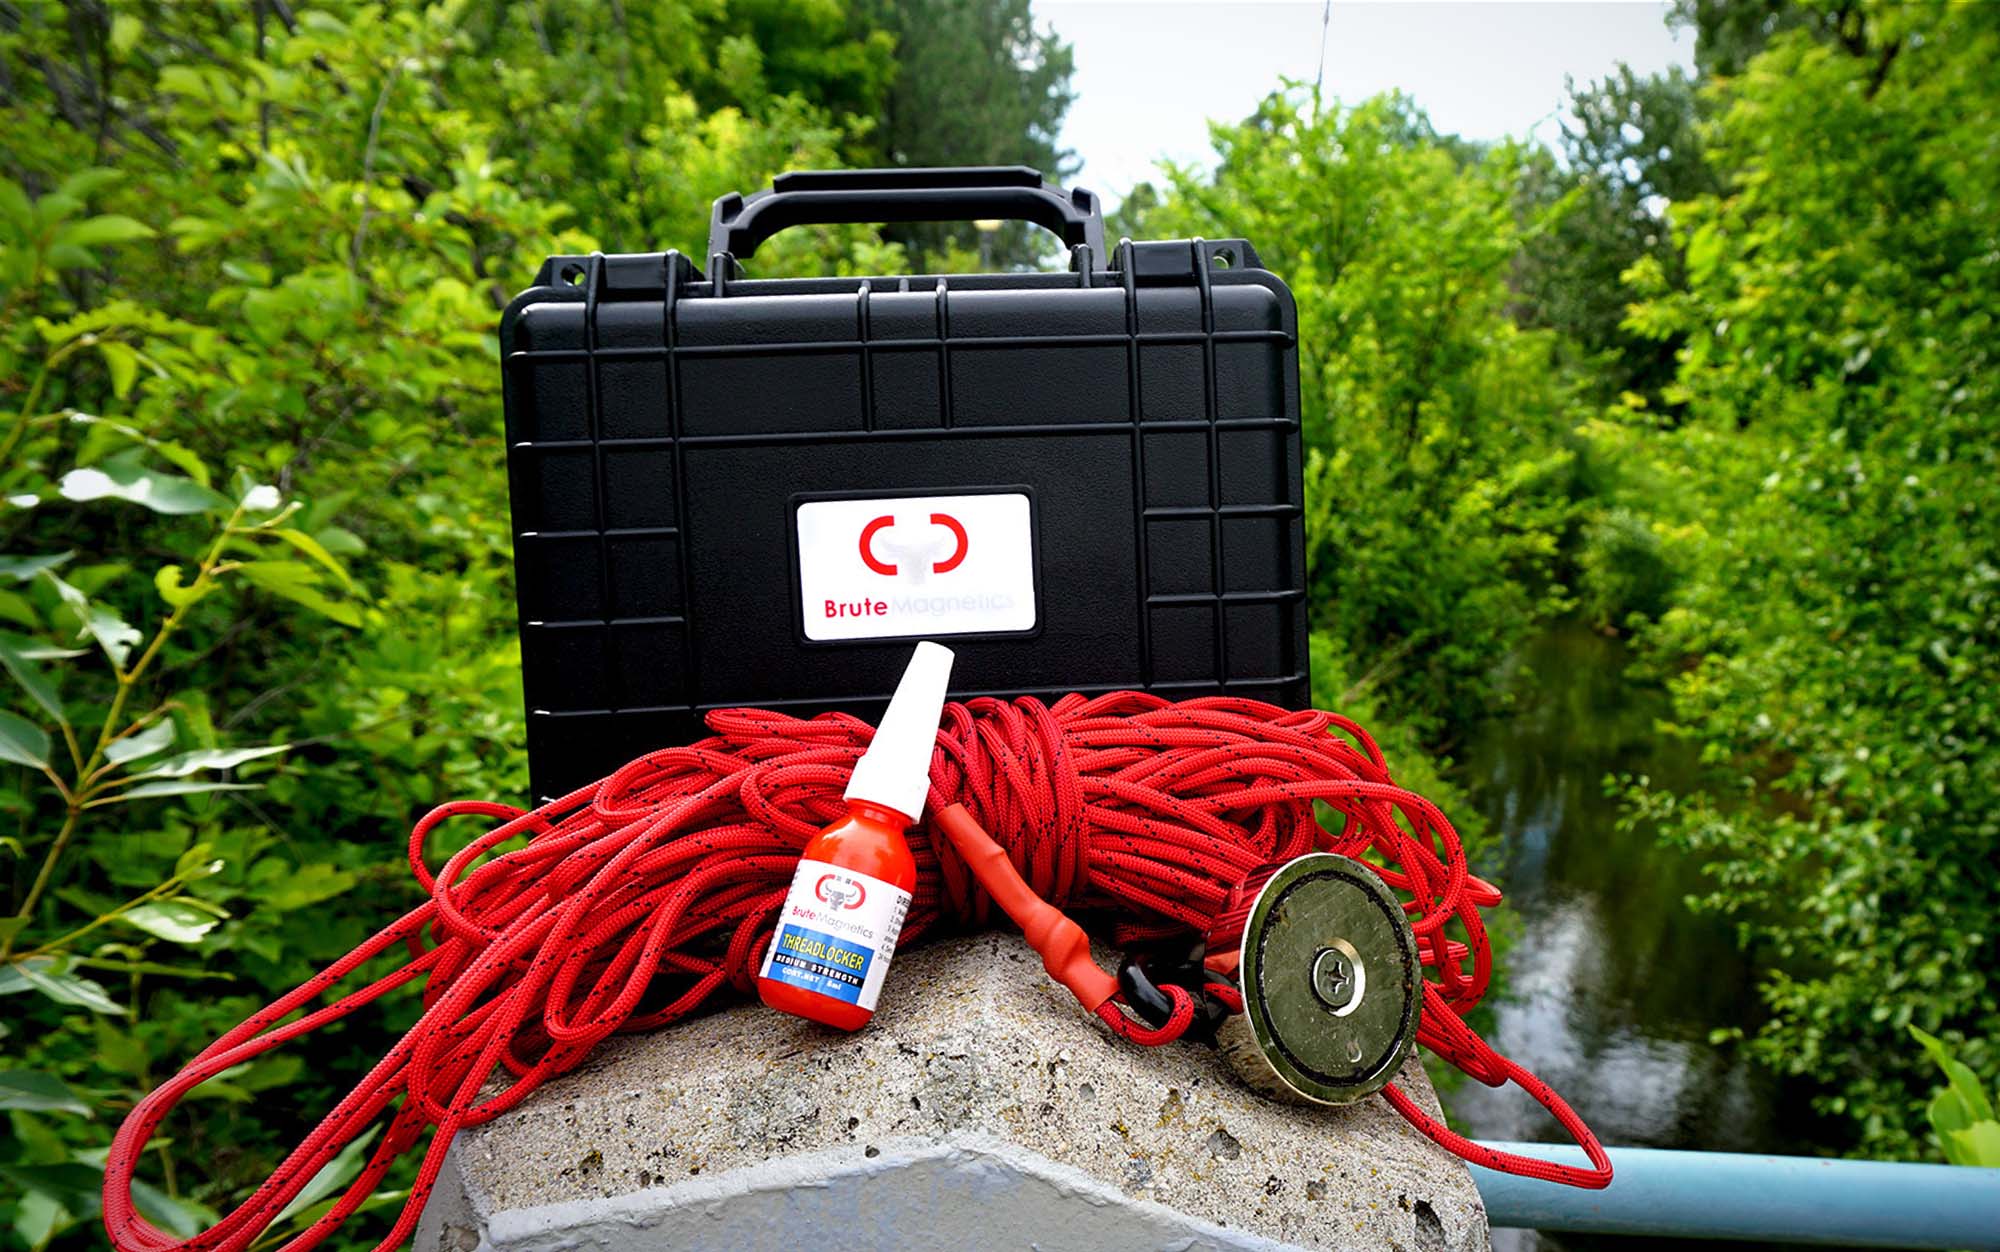 Magnet Fishing And Magnetic Angling Tote Bag